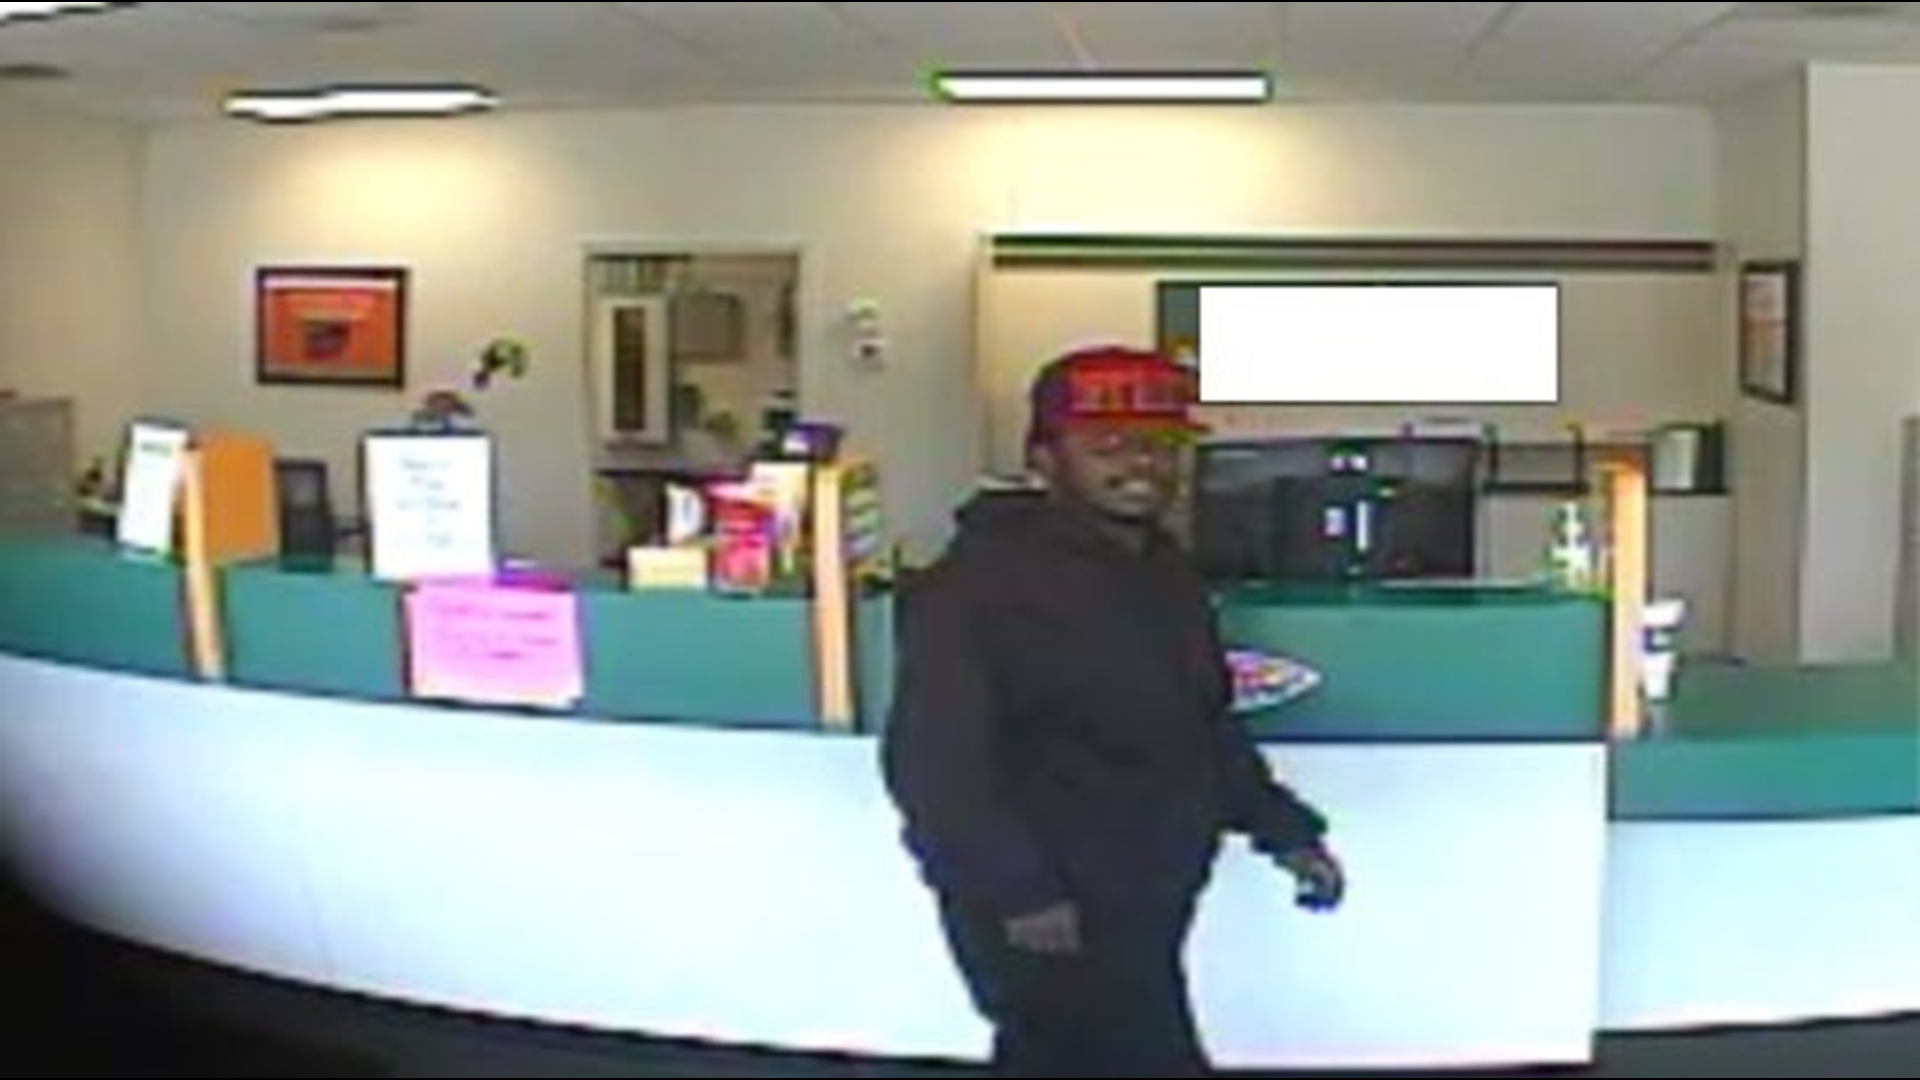 Battle Creek Police are looking for help identifying the suspect of an armed robbery. If you recognize this individual, or have any information about this incident, please contact Silent Observer at 269-964- 3888